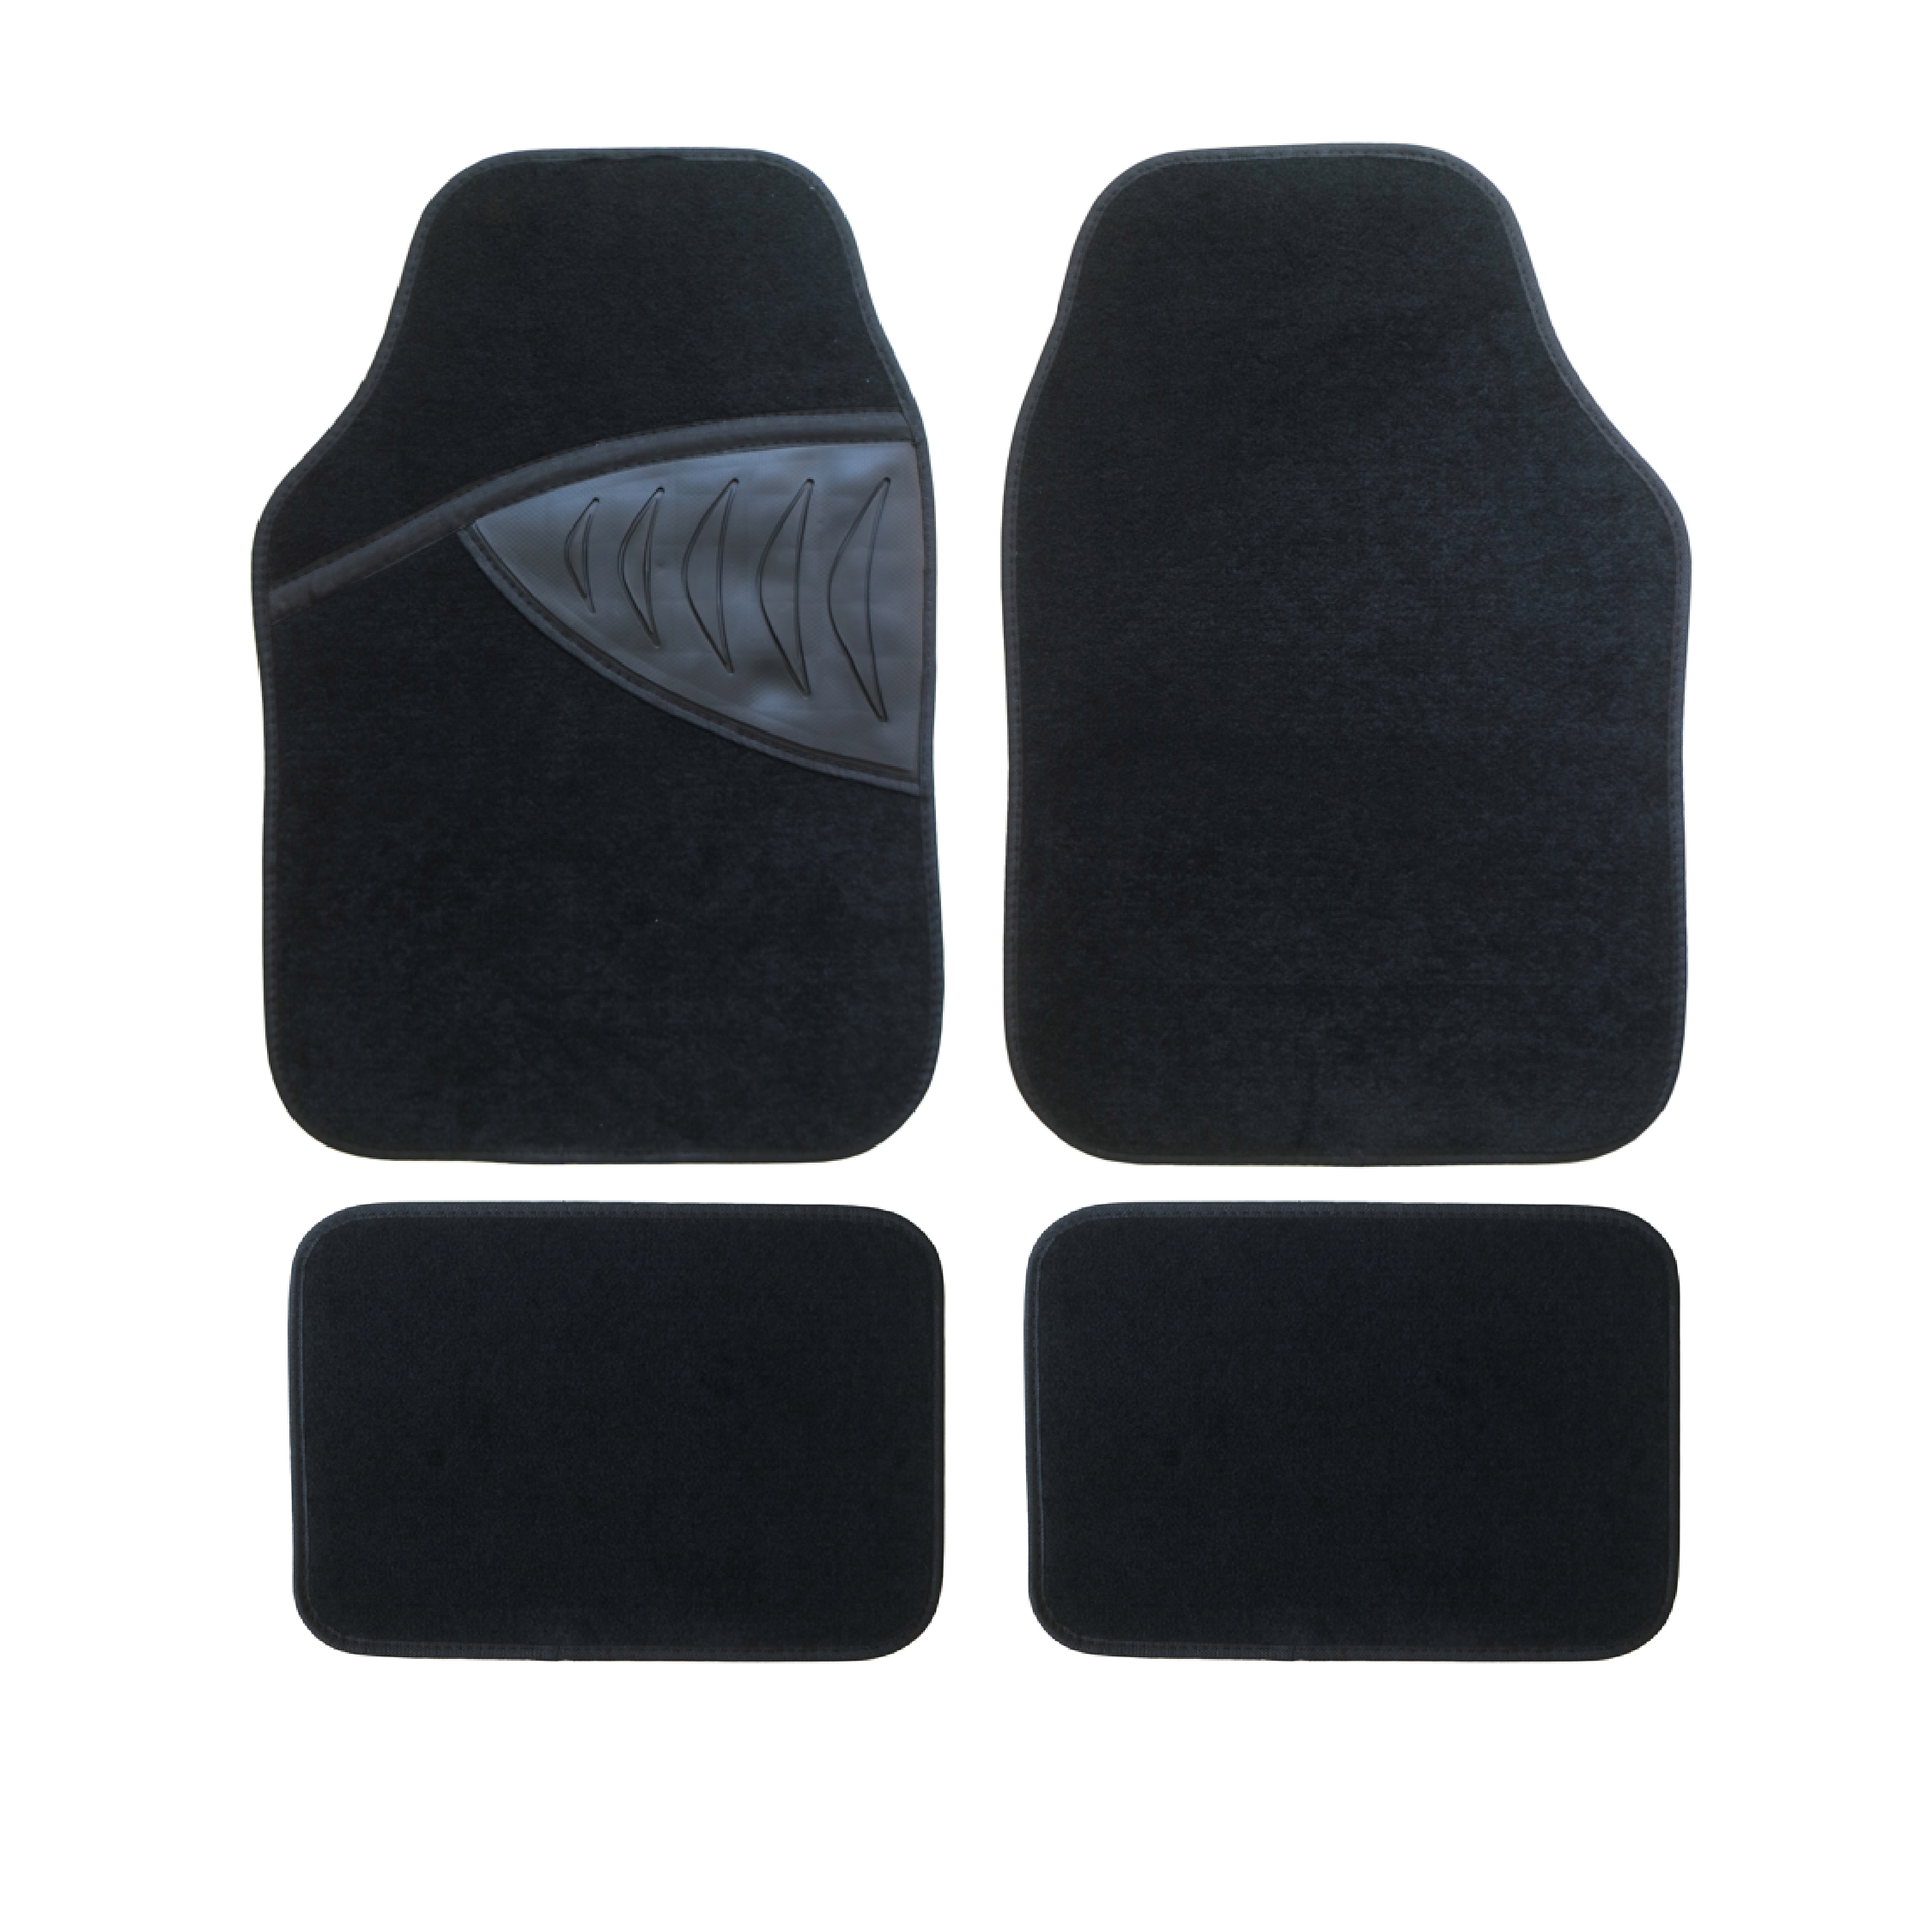 AUTO Carpet Car Floor Mats with Black Safety Heel Pad – Front and Rear Mats Universal Fit for Suvs, Sedans, Vans (4 Pcs) 8809 Featured Image